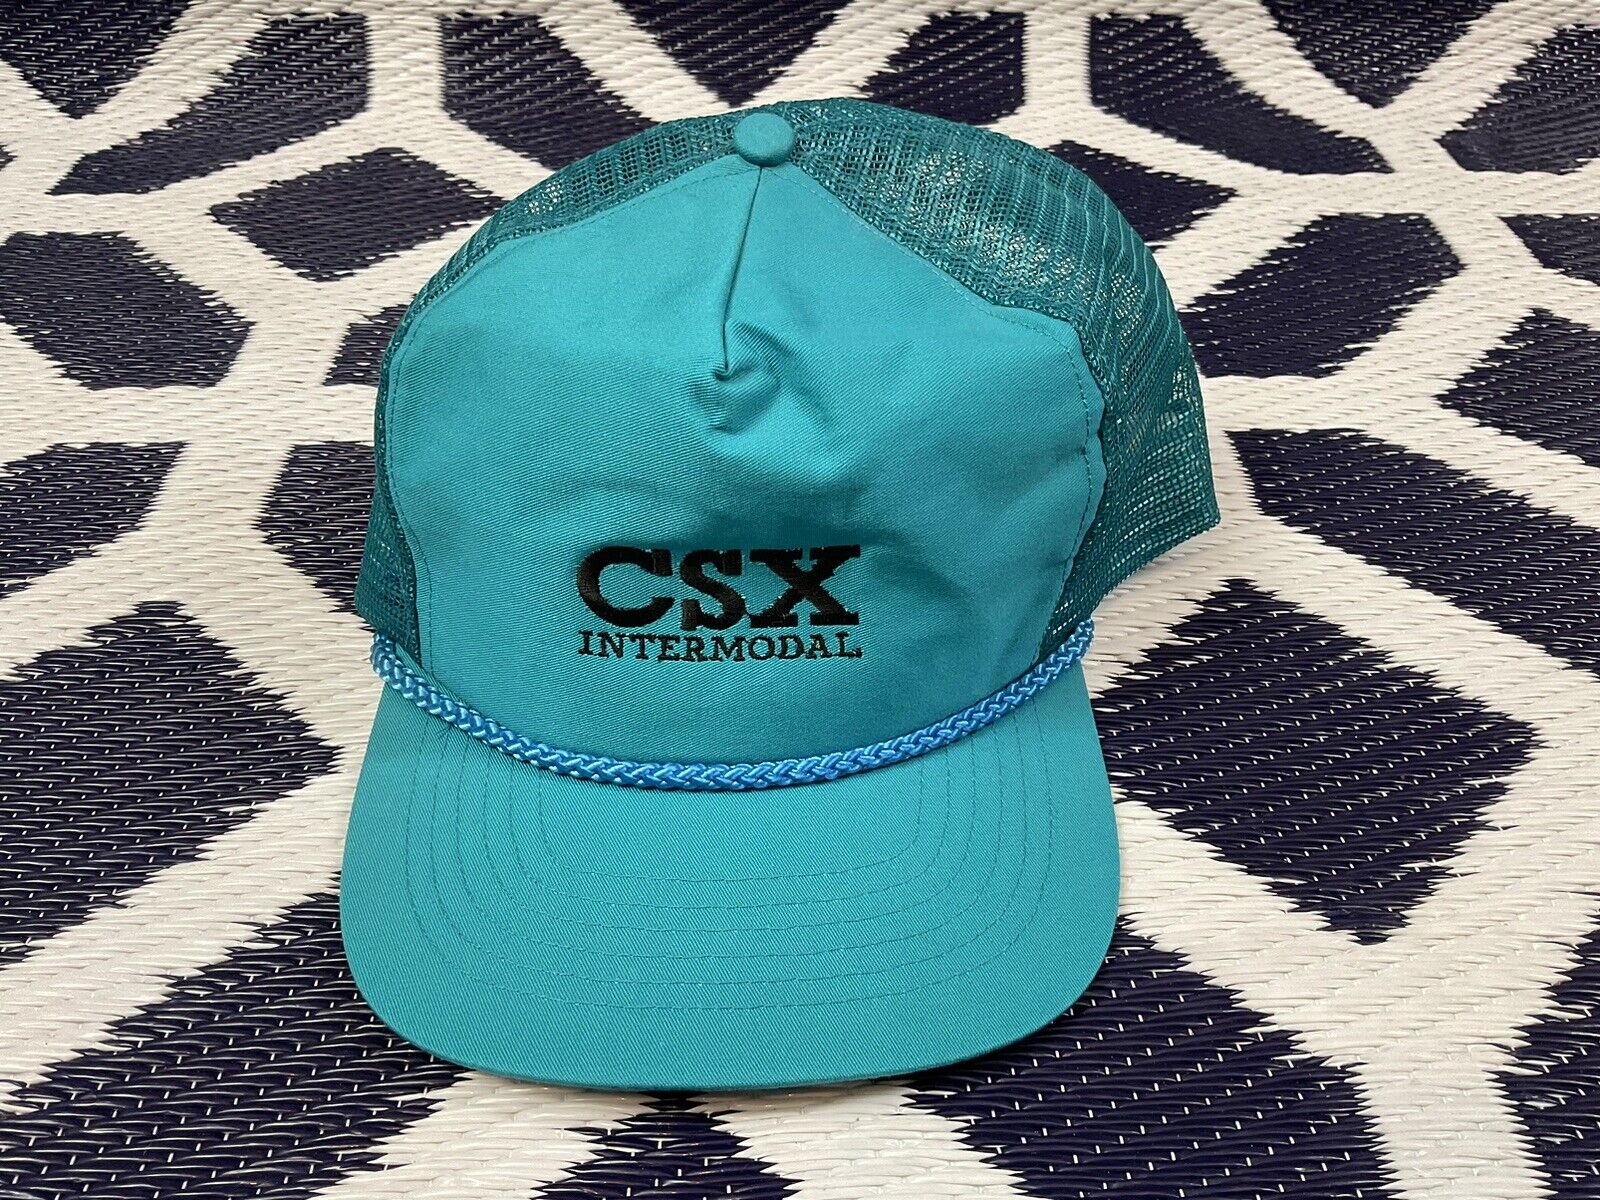 Vintage Rare CSX Train Company Hat Turquoise by ASP Design made in USA One Size